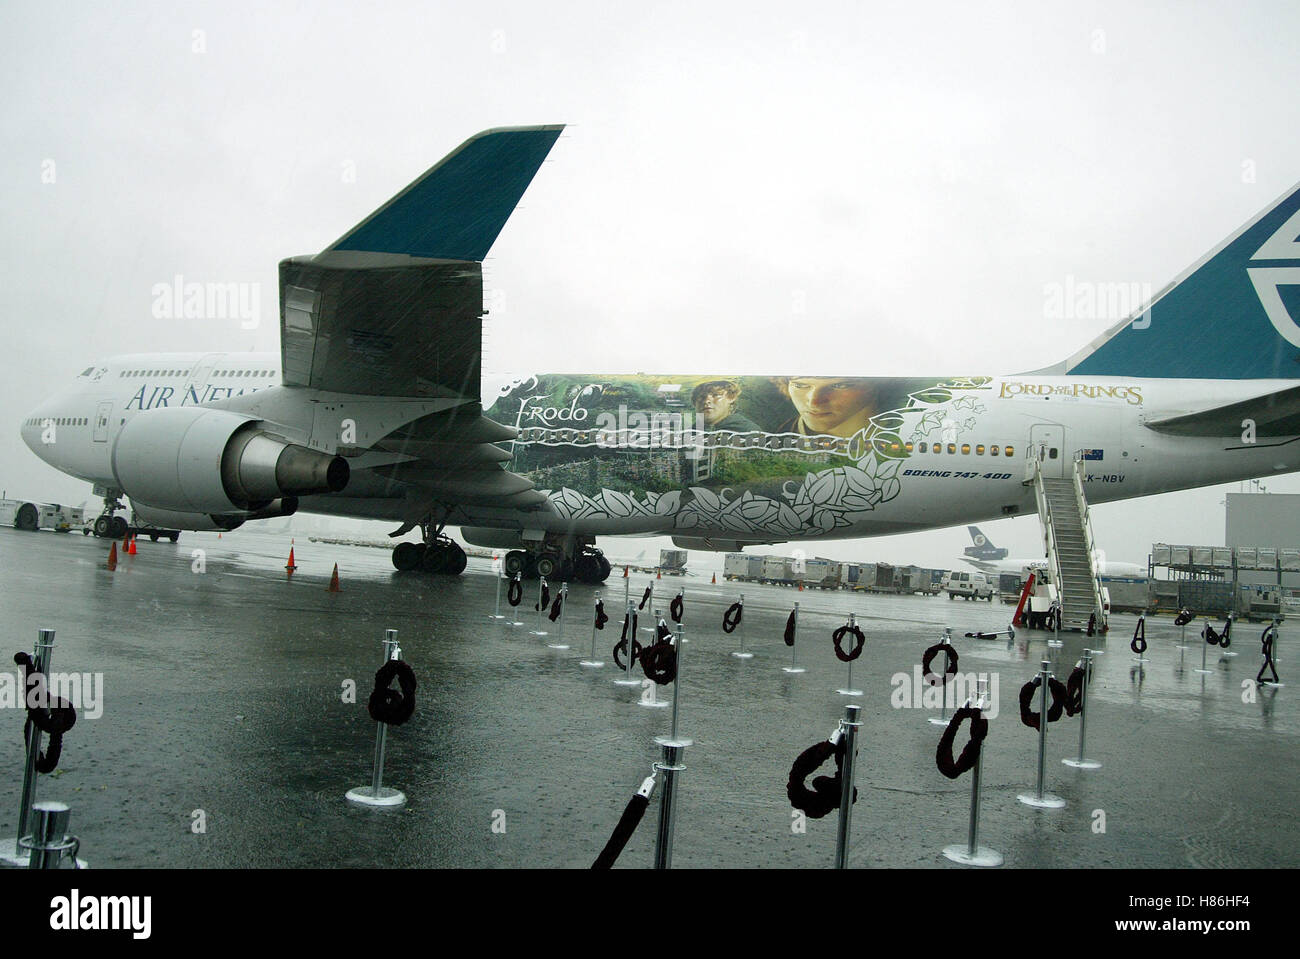 Sidst Sprede Bevise LORD OF THE RINGS AIRPLANE LORD OF THE RINGS. AIR NZ LAX LOS ANGELES USA 16  December 2002 Stock Photo - Alamy